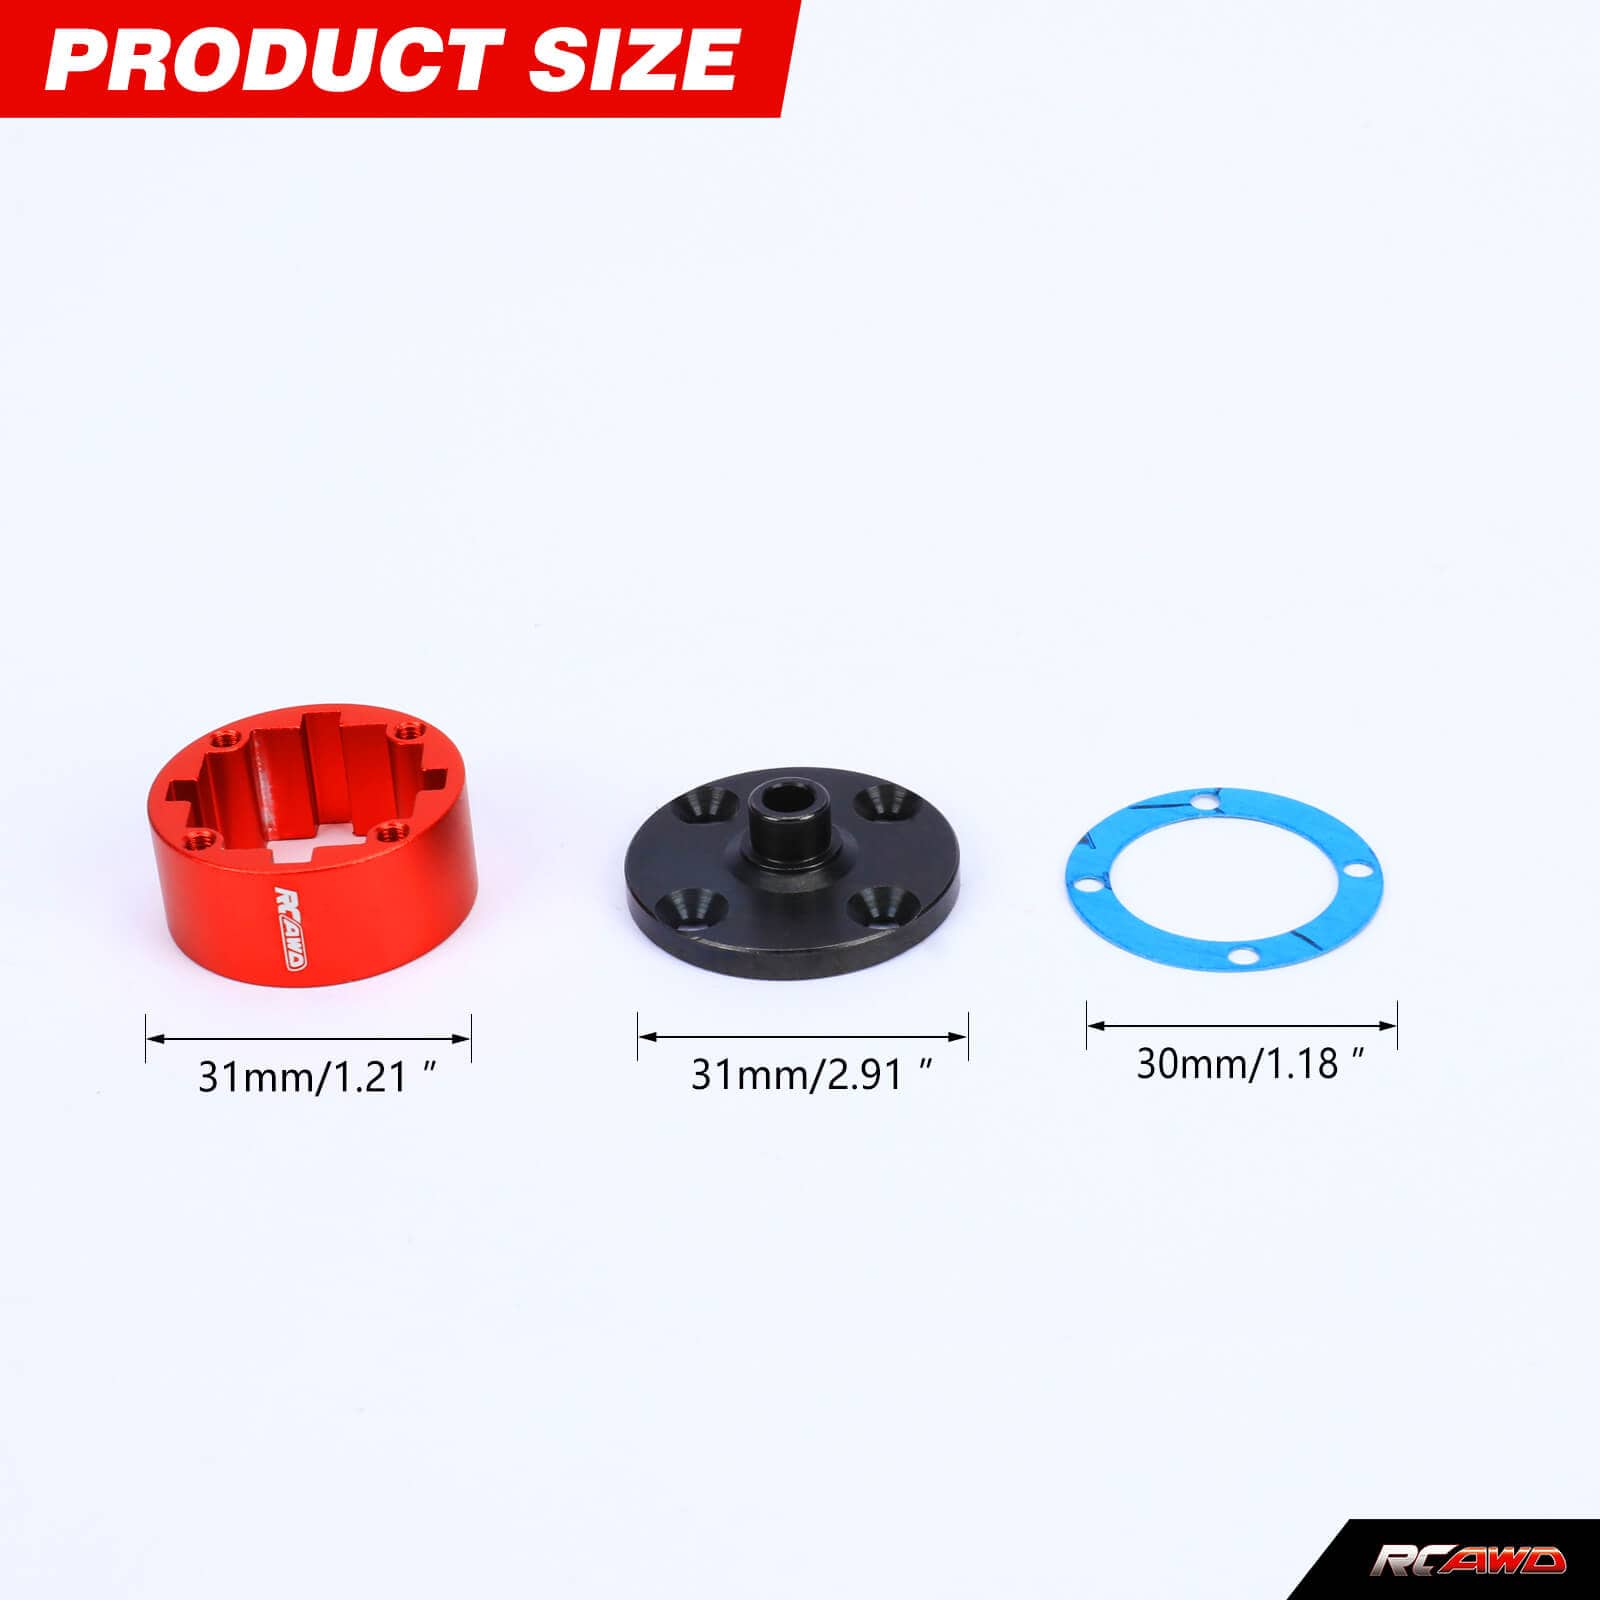 RCAWD ARRMA 6S Red RCAWD arrma 6s Upgrades Metal Diff Case Set